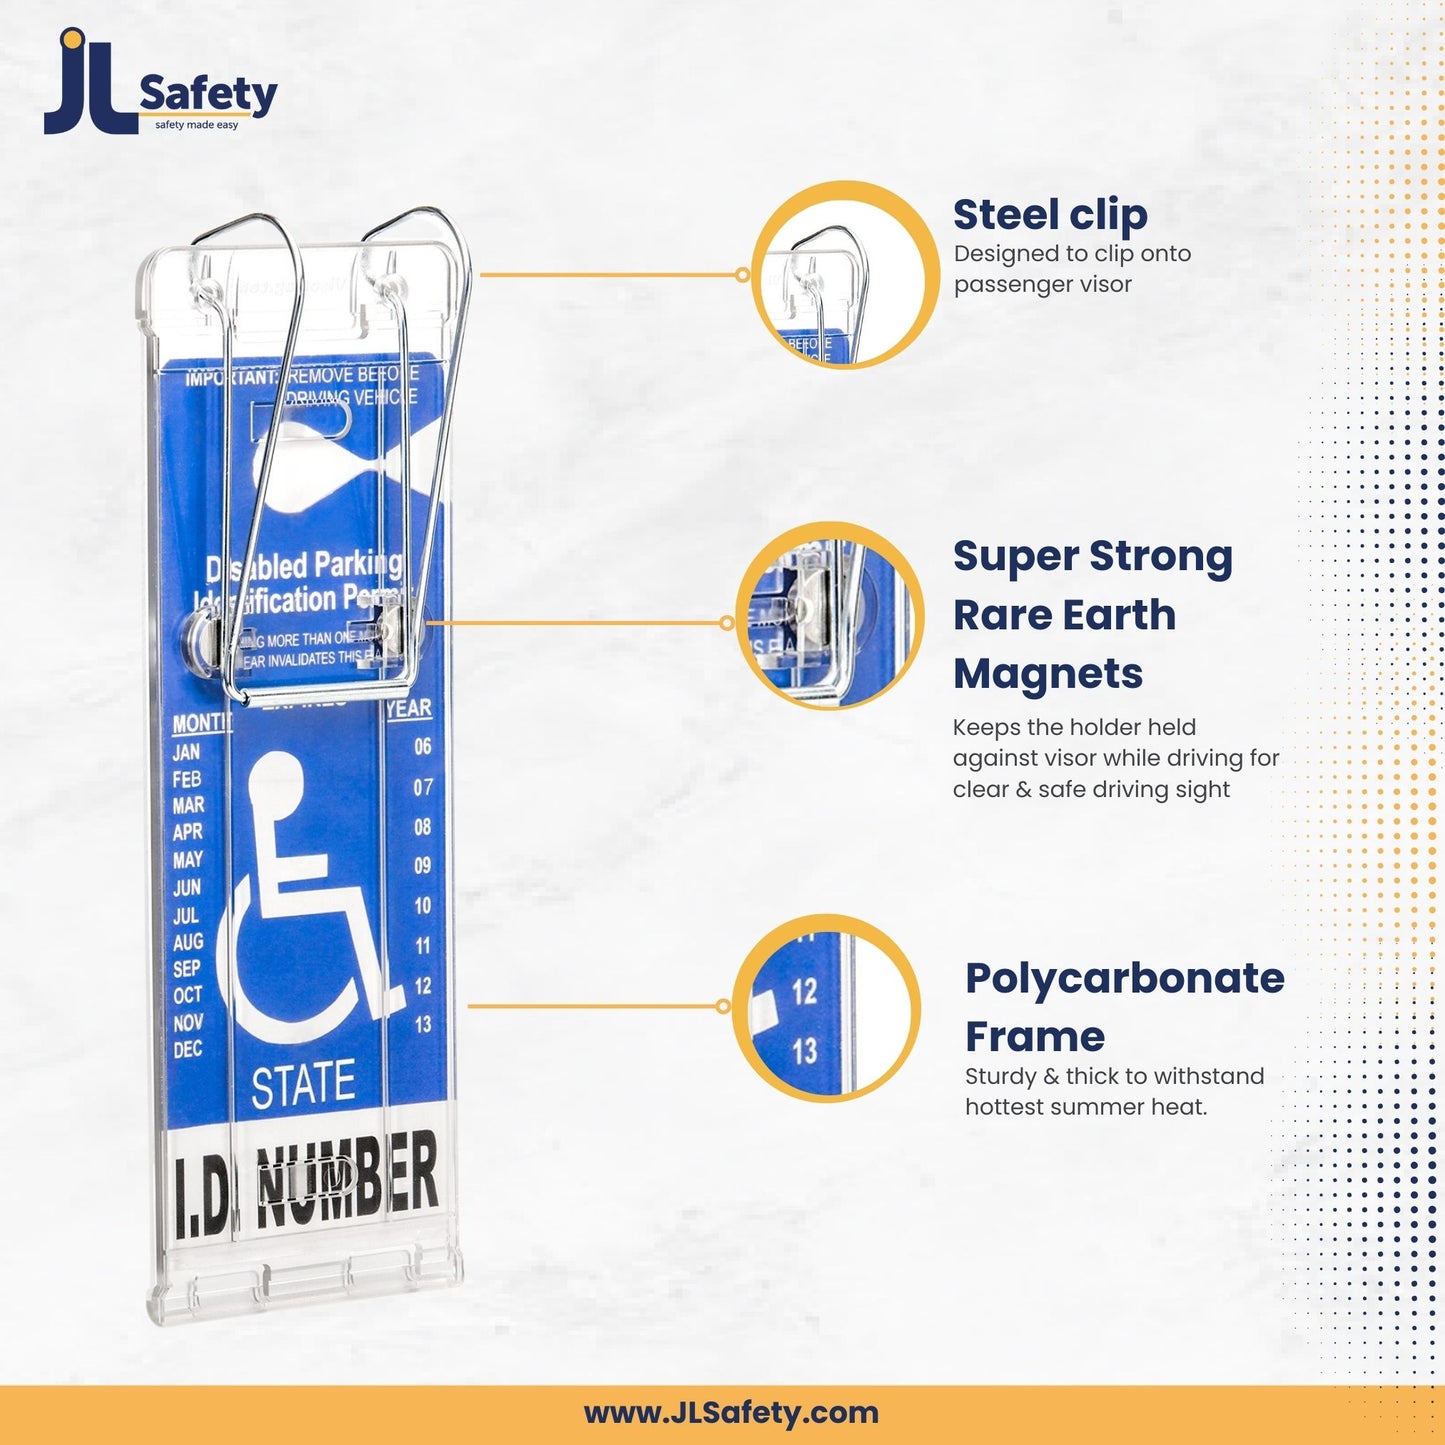 NEW Visortag® Vertical by JL Safety® - The Best Handicap Parking Placard Holder on the Market. Easily Protect, Display & Swing Away your Parking Tag. Hard Plastic to Withstand 3-digit Hot Sun. Made in USA